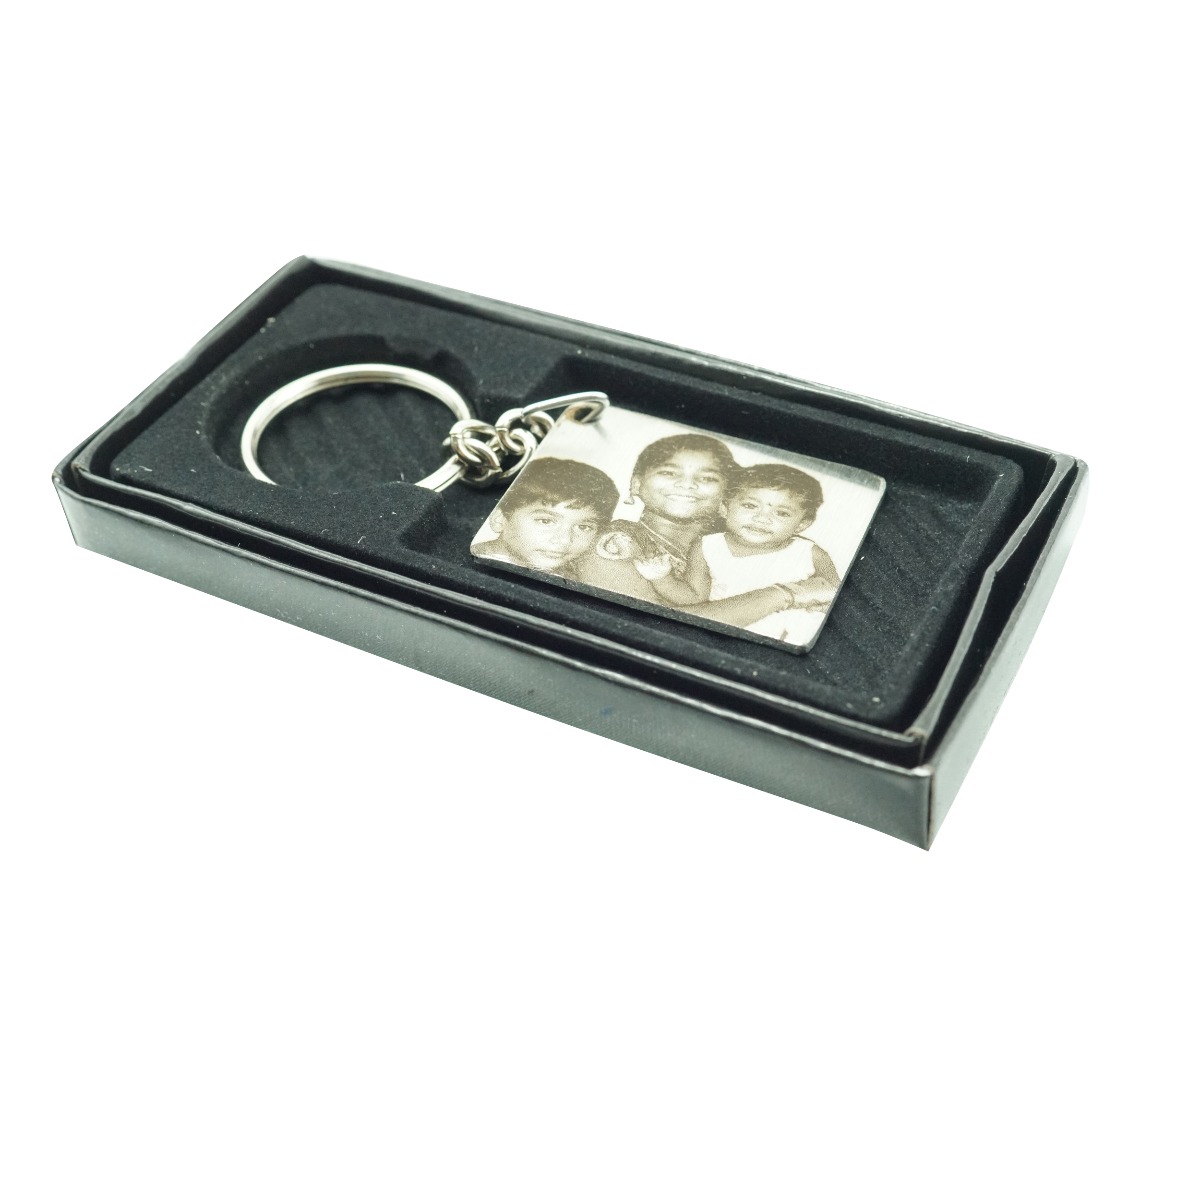 Penhouse.in Stainless Steel Photo Key chain Model No.KP0032